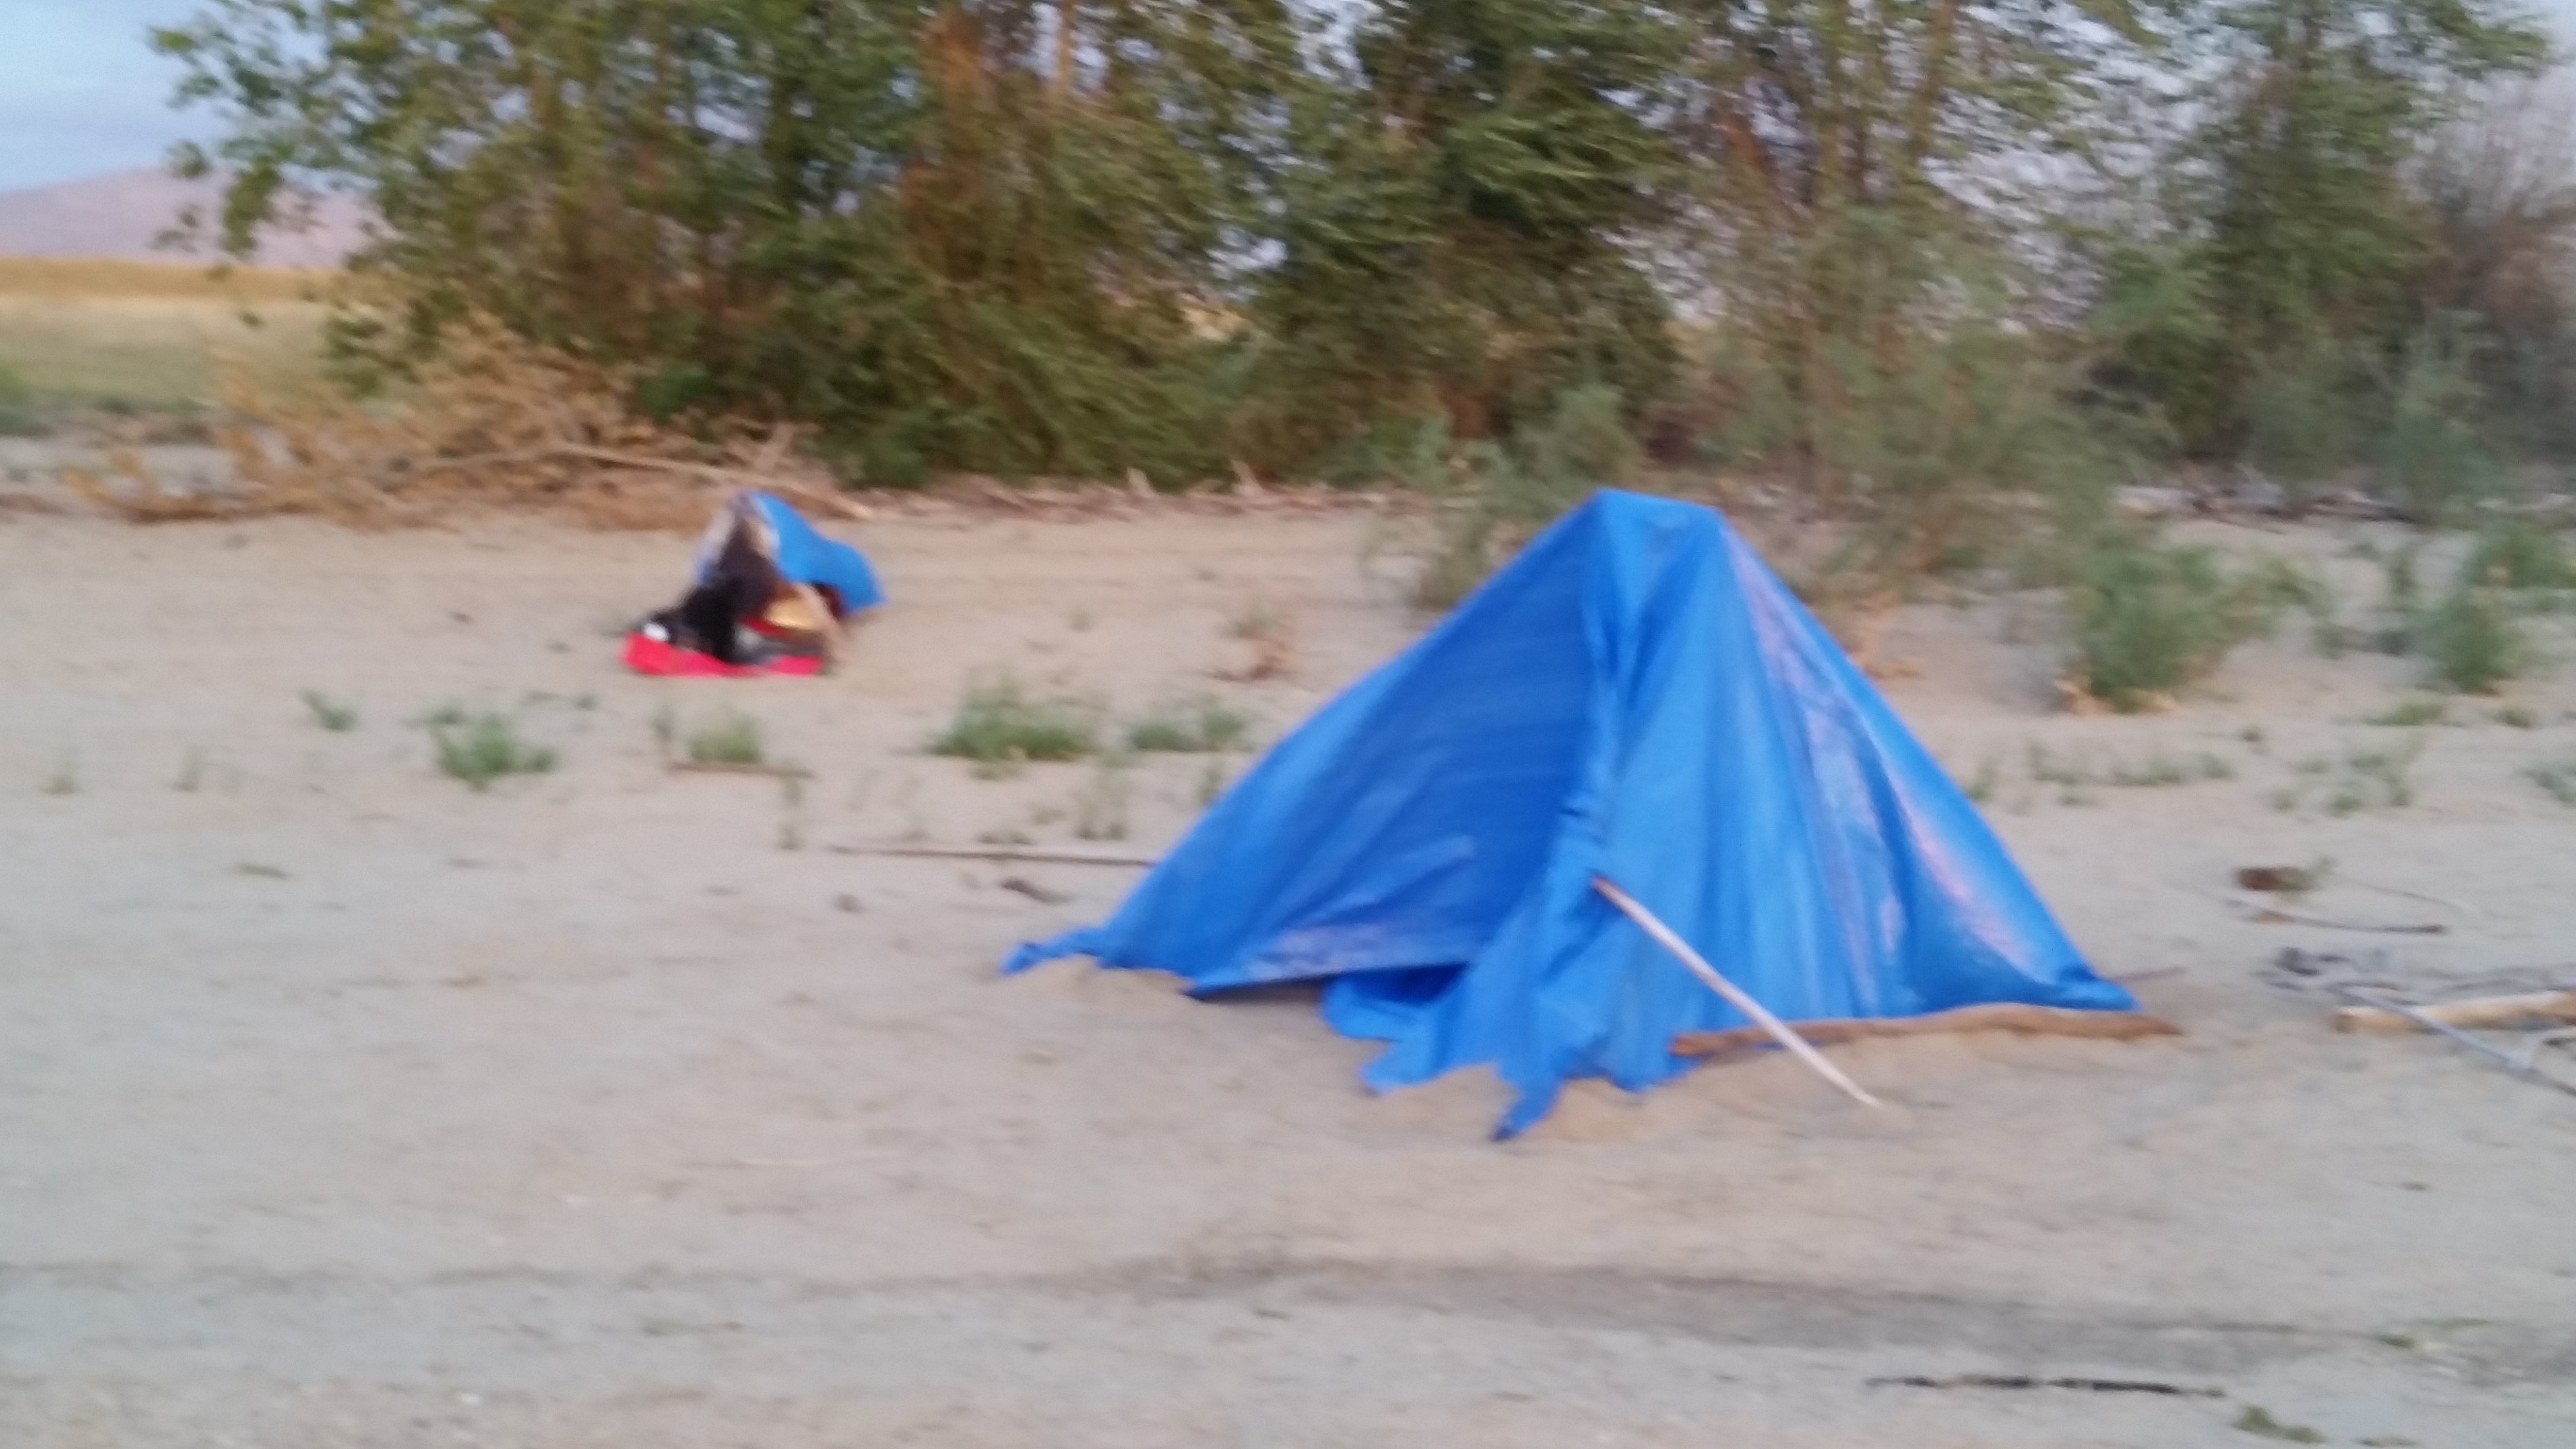 camping on the beach in our emergency shelters